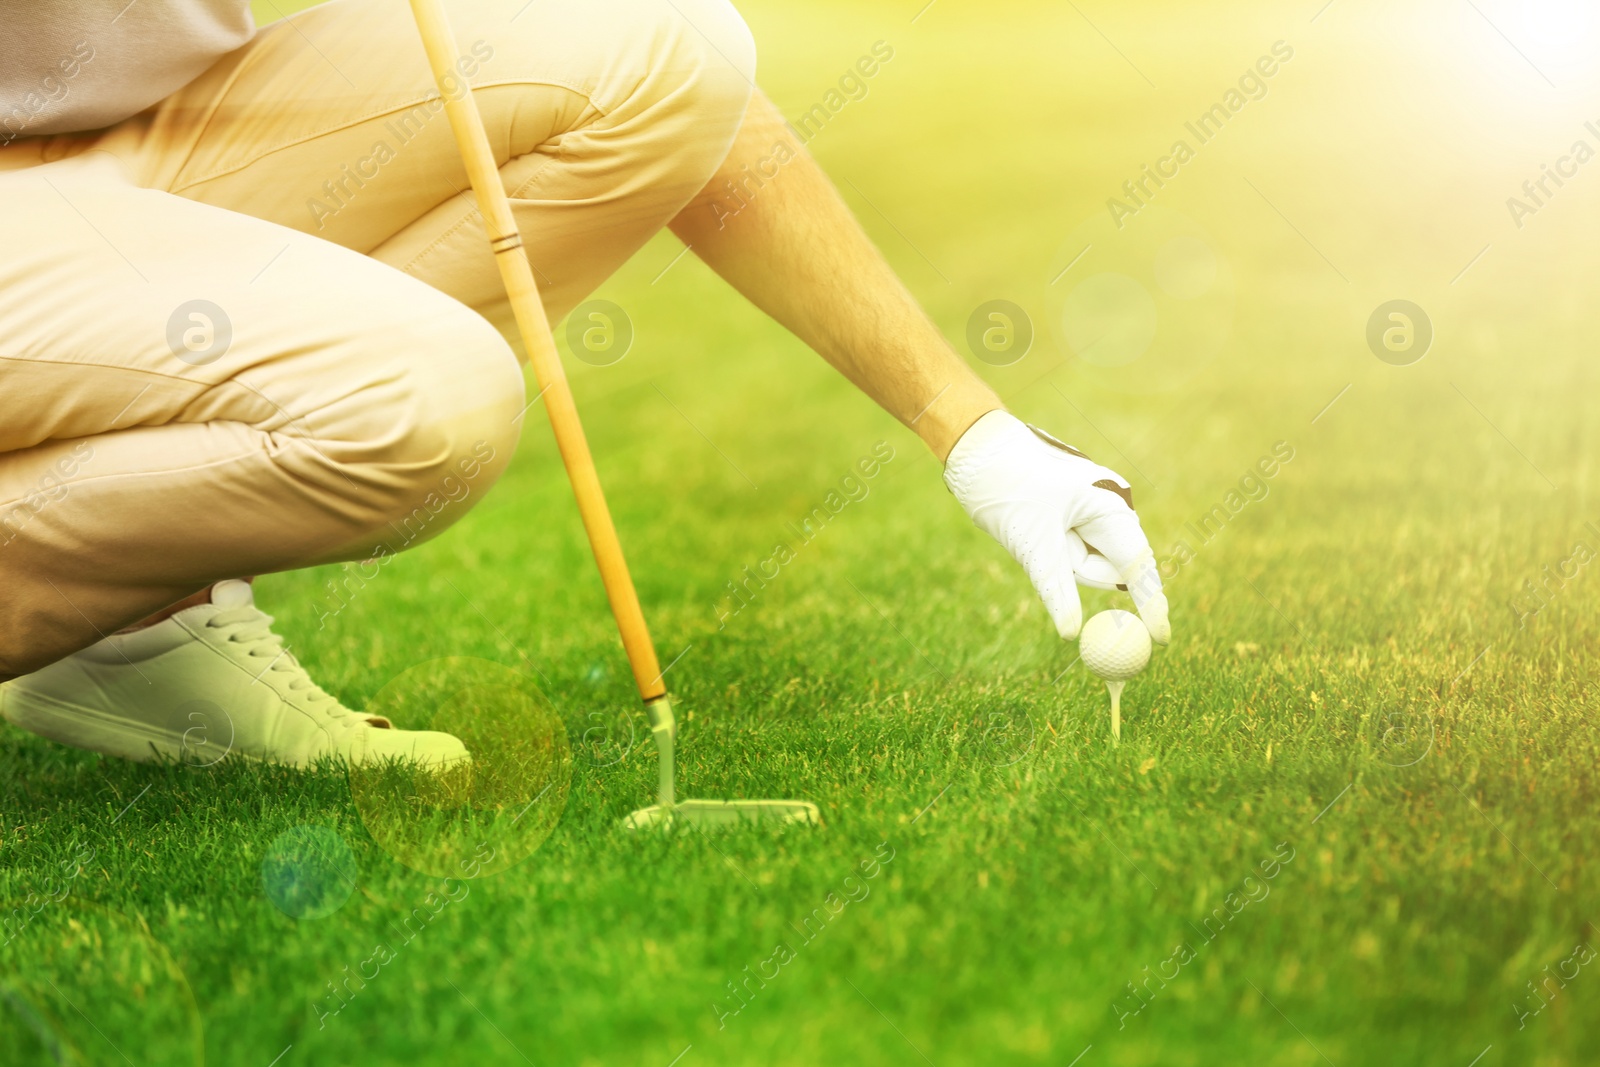 Image of Man playing golf in park on sunny day